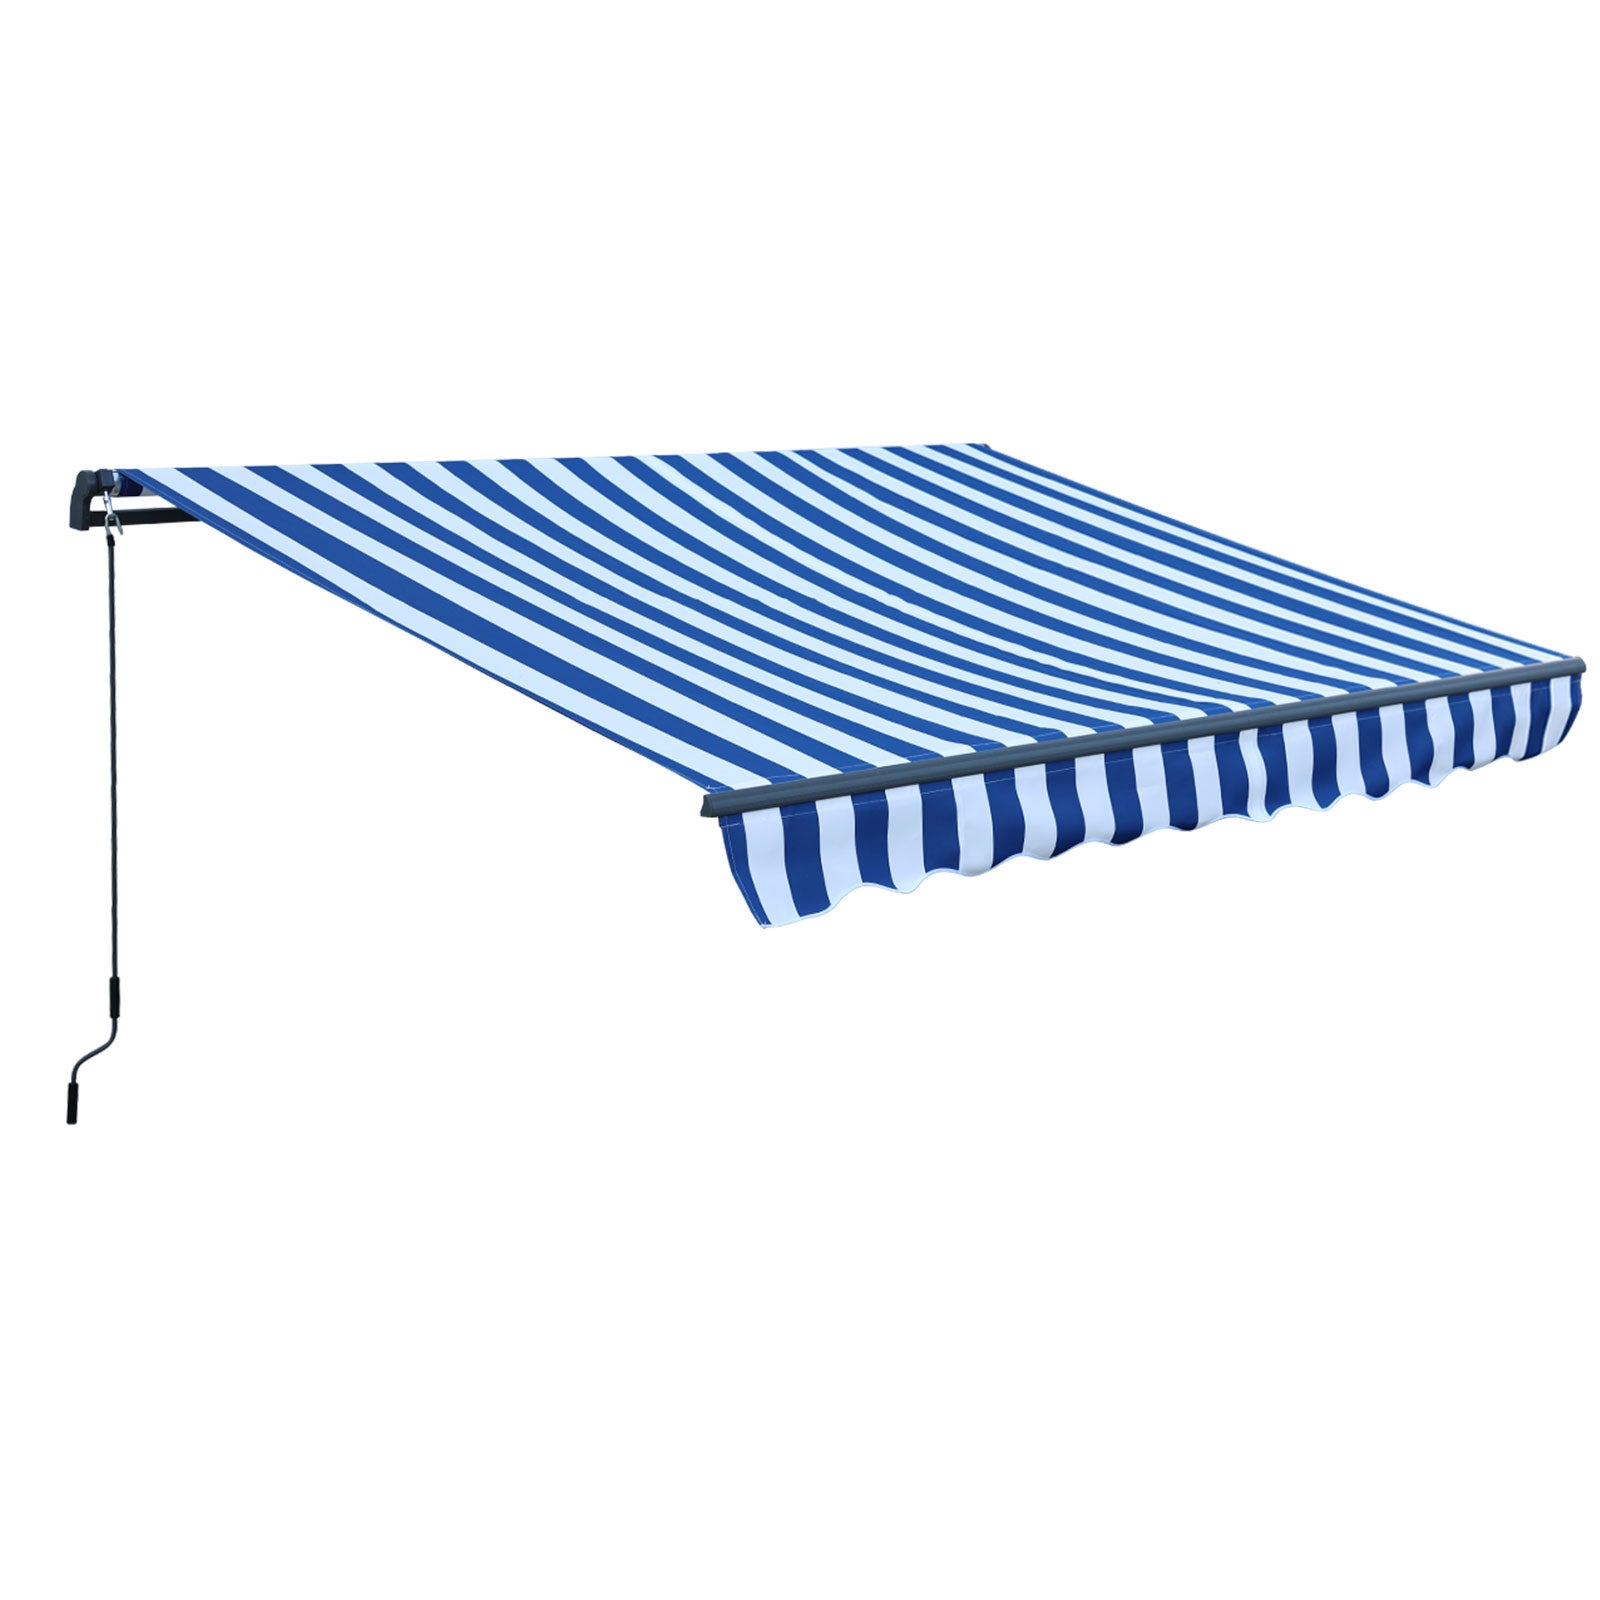 10' x 8' x 5' Retractable Window Awning Sunshade Shelter,Polyester Fabric,with Brackets and Two Wall Bases  Aoodor  Blue and White  